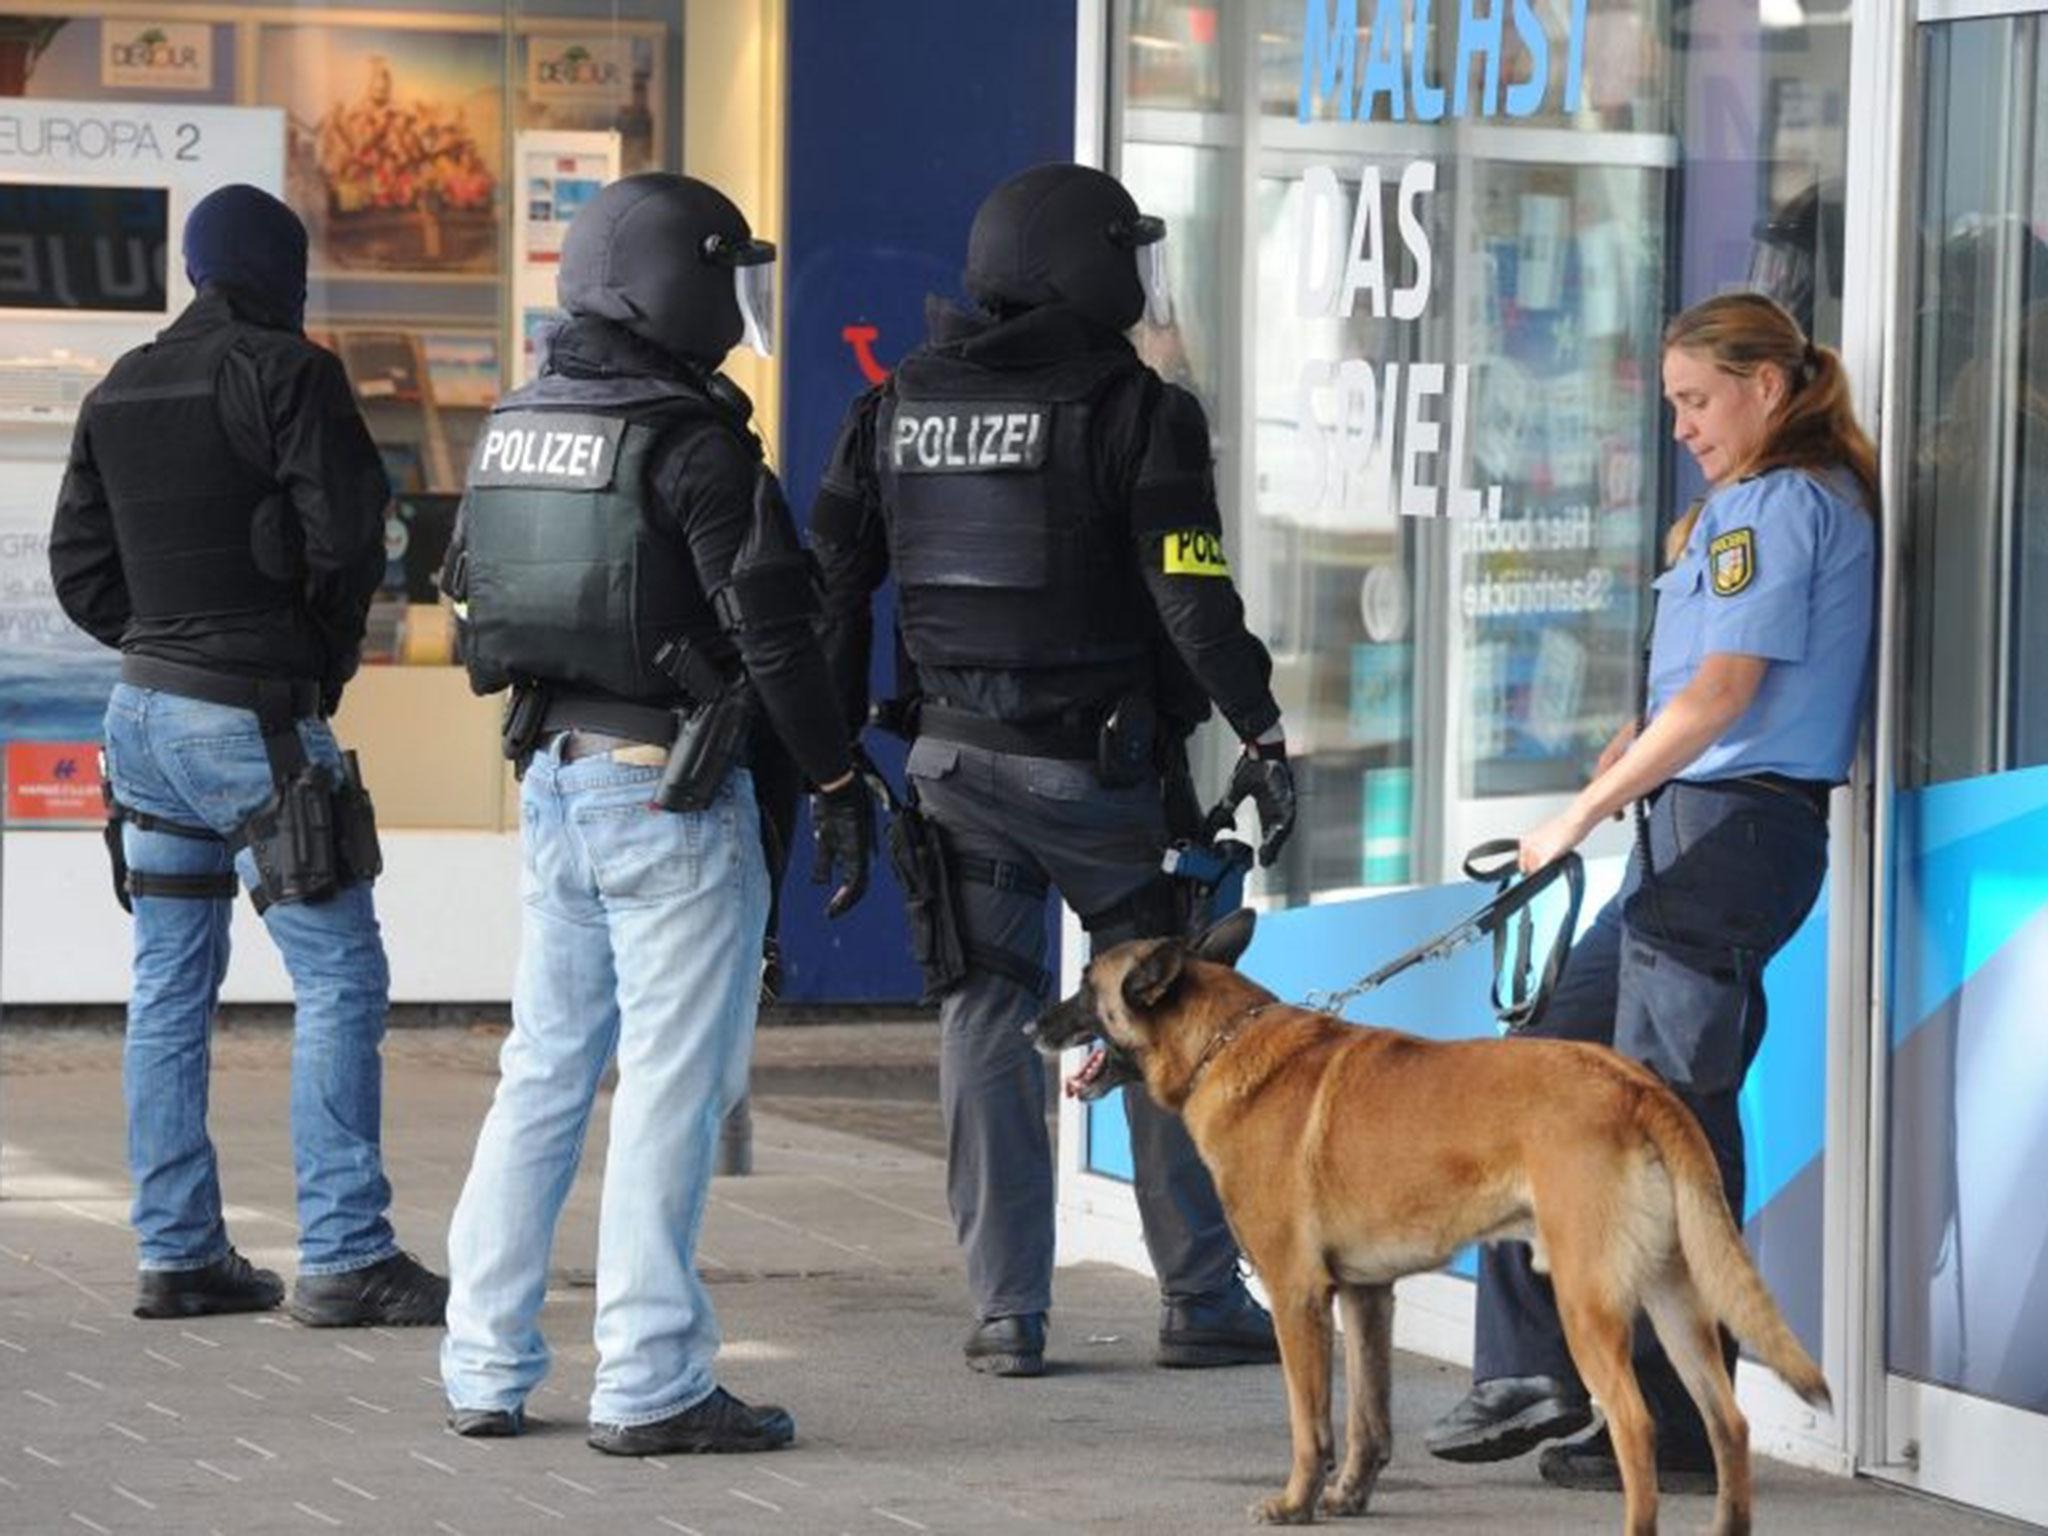 Riot police wait out the front of a restaurant in the center of Saarbruecken where an injured and reportedly armed man has barricaded himself, in Saarbruecken, Germnay, 7 August, 2016